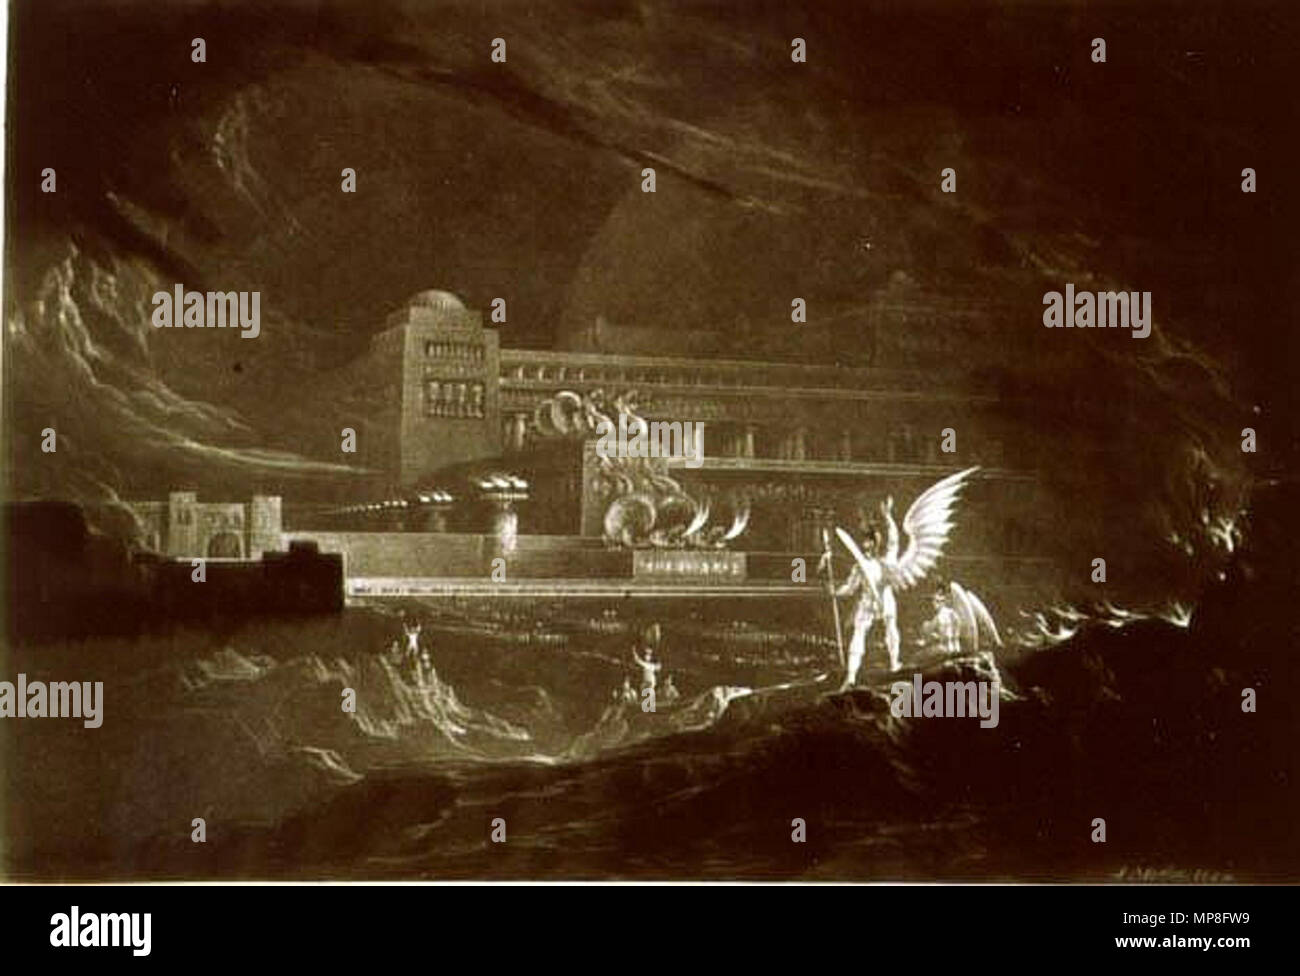 . Pandemonium - One out of a set of mezzotints with the same title . between 1823 and 1827 (see [1]).   John Martin  (1789–1854)     Alternative names John Martin I; John, I Martin; J. Martin; Martin  Description English painter and engraver  Date of birth/death 19 July 1789 17 February 1854  Location of birth/death Haydon Bridge Douglas  Work location England  Authority control  : Q937096 VIAF: 92133015 ISNI: 0000 0000 8164 7113 ULAN: 500023063 LCCN: n50040933 WGA: MARTIN, John WorldCat 735 John-Martin-Pandemonium-color-sharpend Stock Photo